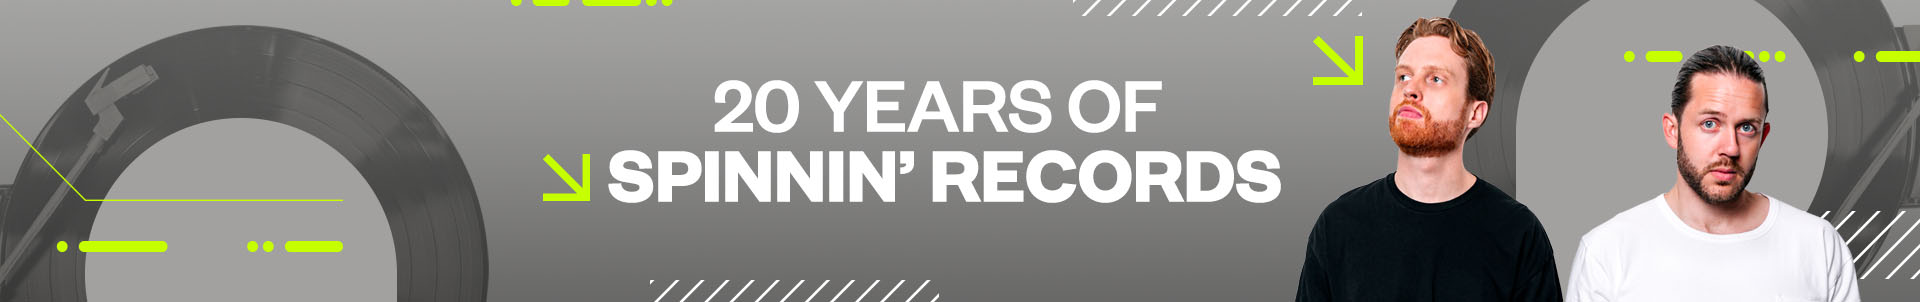 20 Years Spinnin' Records - new video with The Him